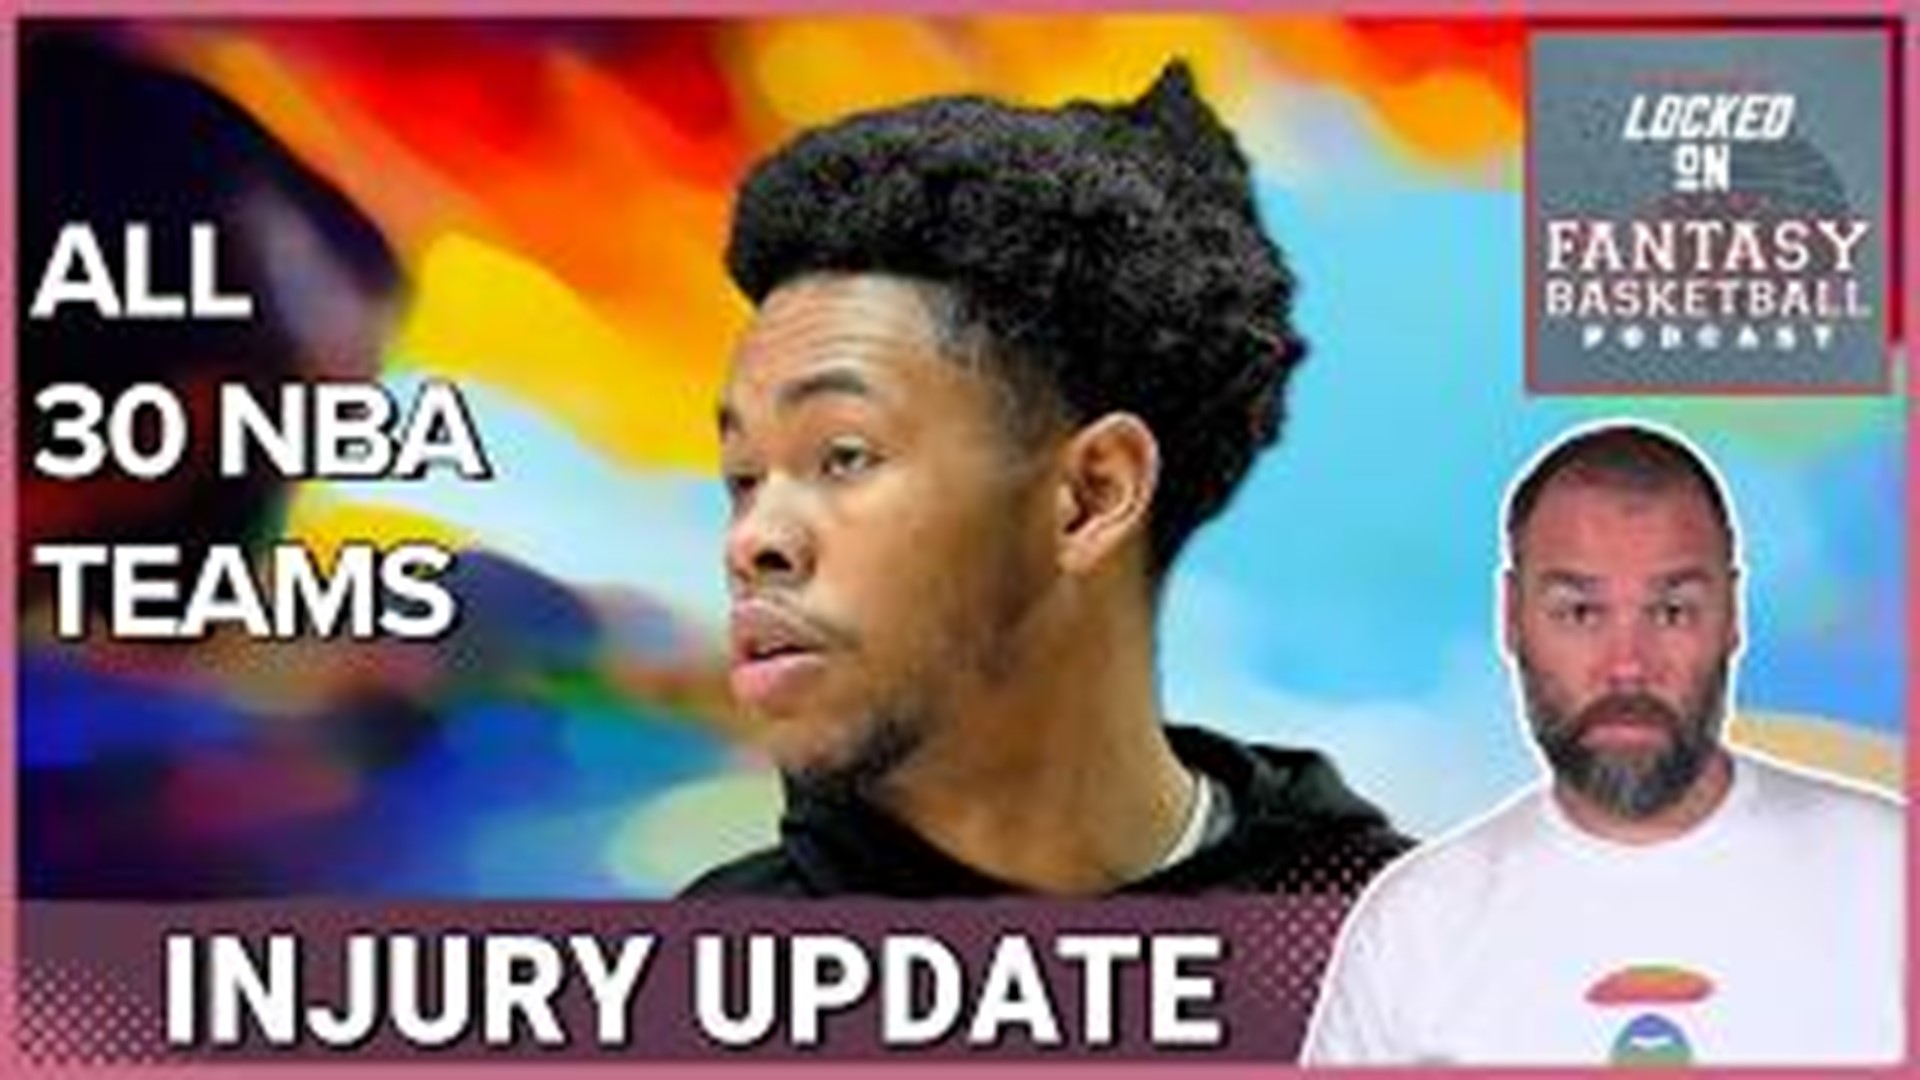 In this essential update, Josh Lloyd covers the latest injury news for all 30 NBA teams, focusing on players like Anfernee Simons and Cade Cunningham.